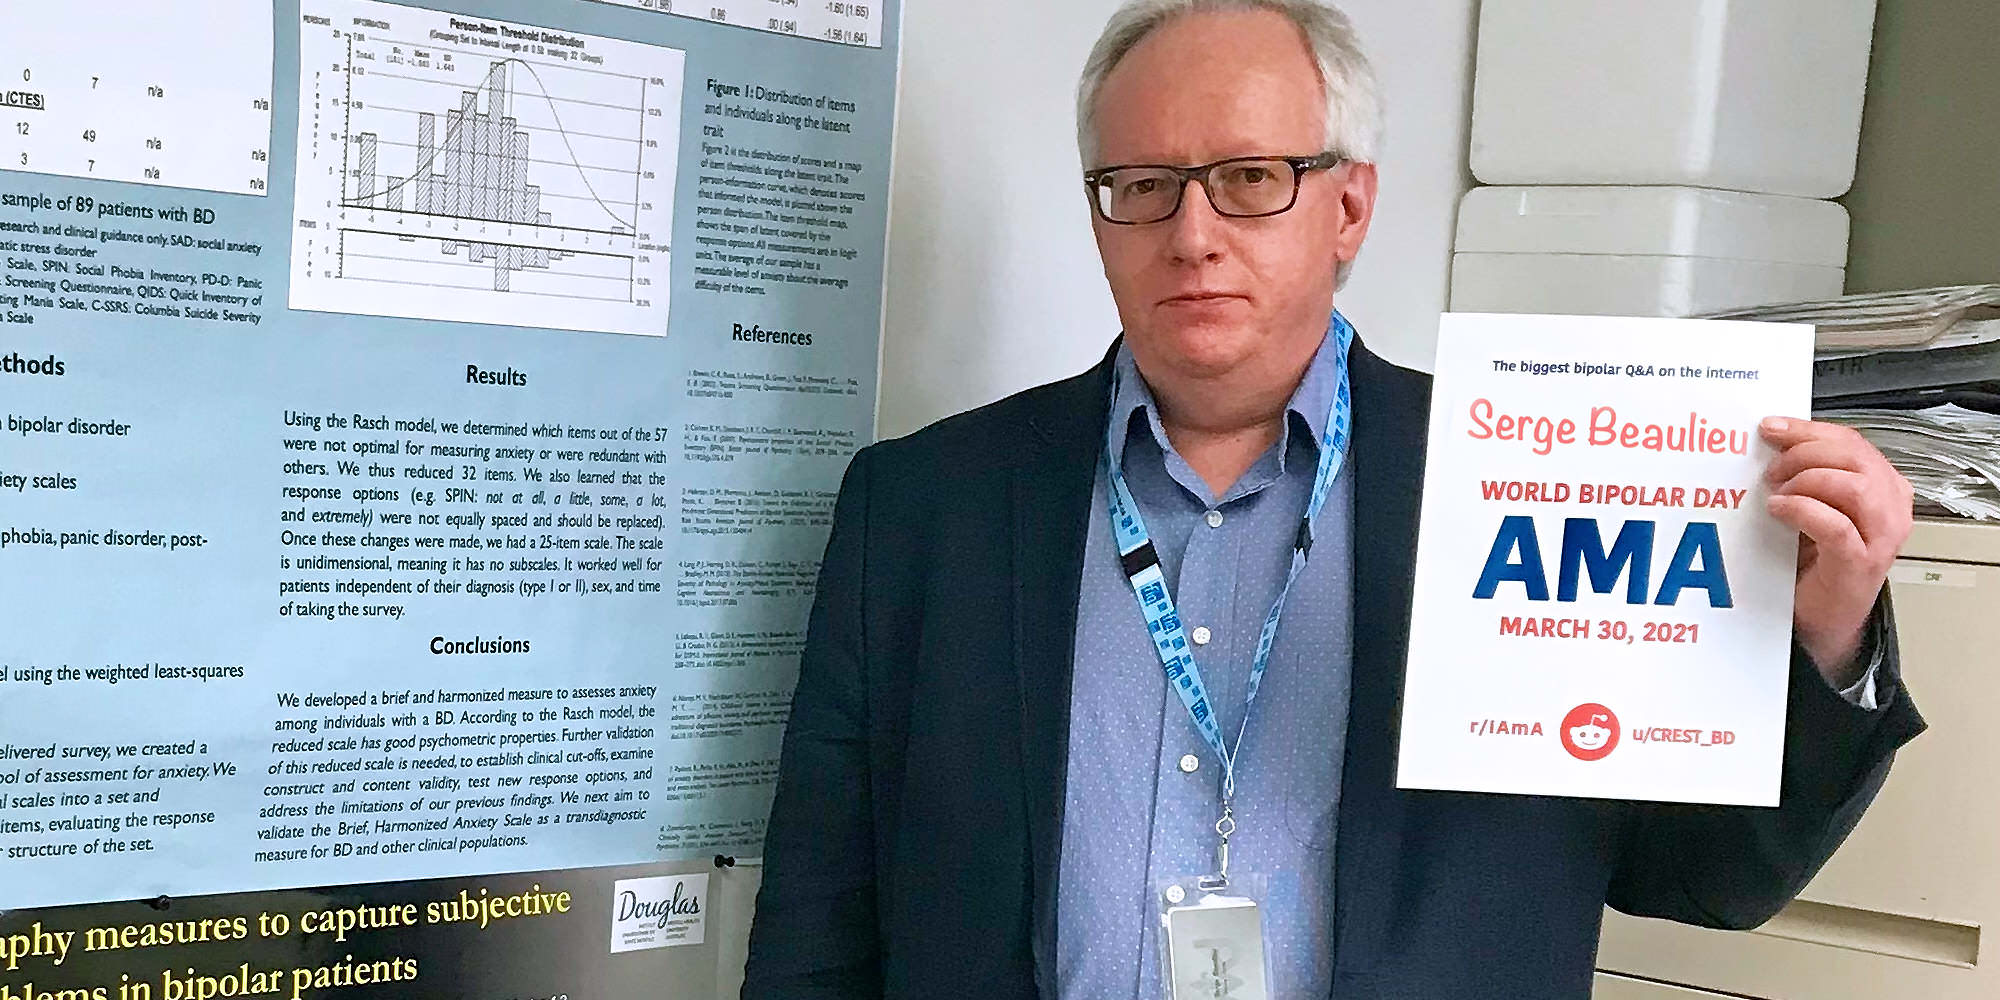 Serge is standing next to a study poster and looking into the camera with a neutral expression. He is Caucasian and has grey hair and thin-rimmed oval glasses. He is wearing a grey suit with a blue shirt and a lanyard. He is holding the AMA proof sign.